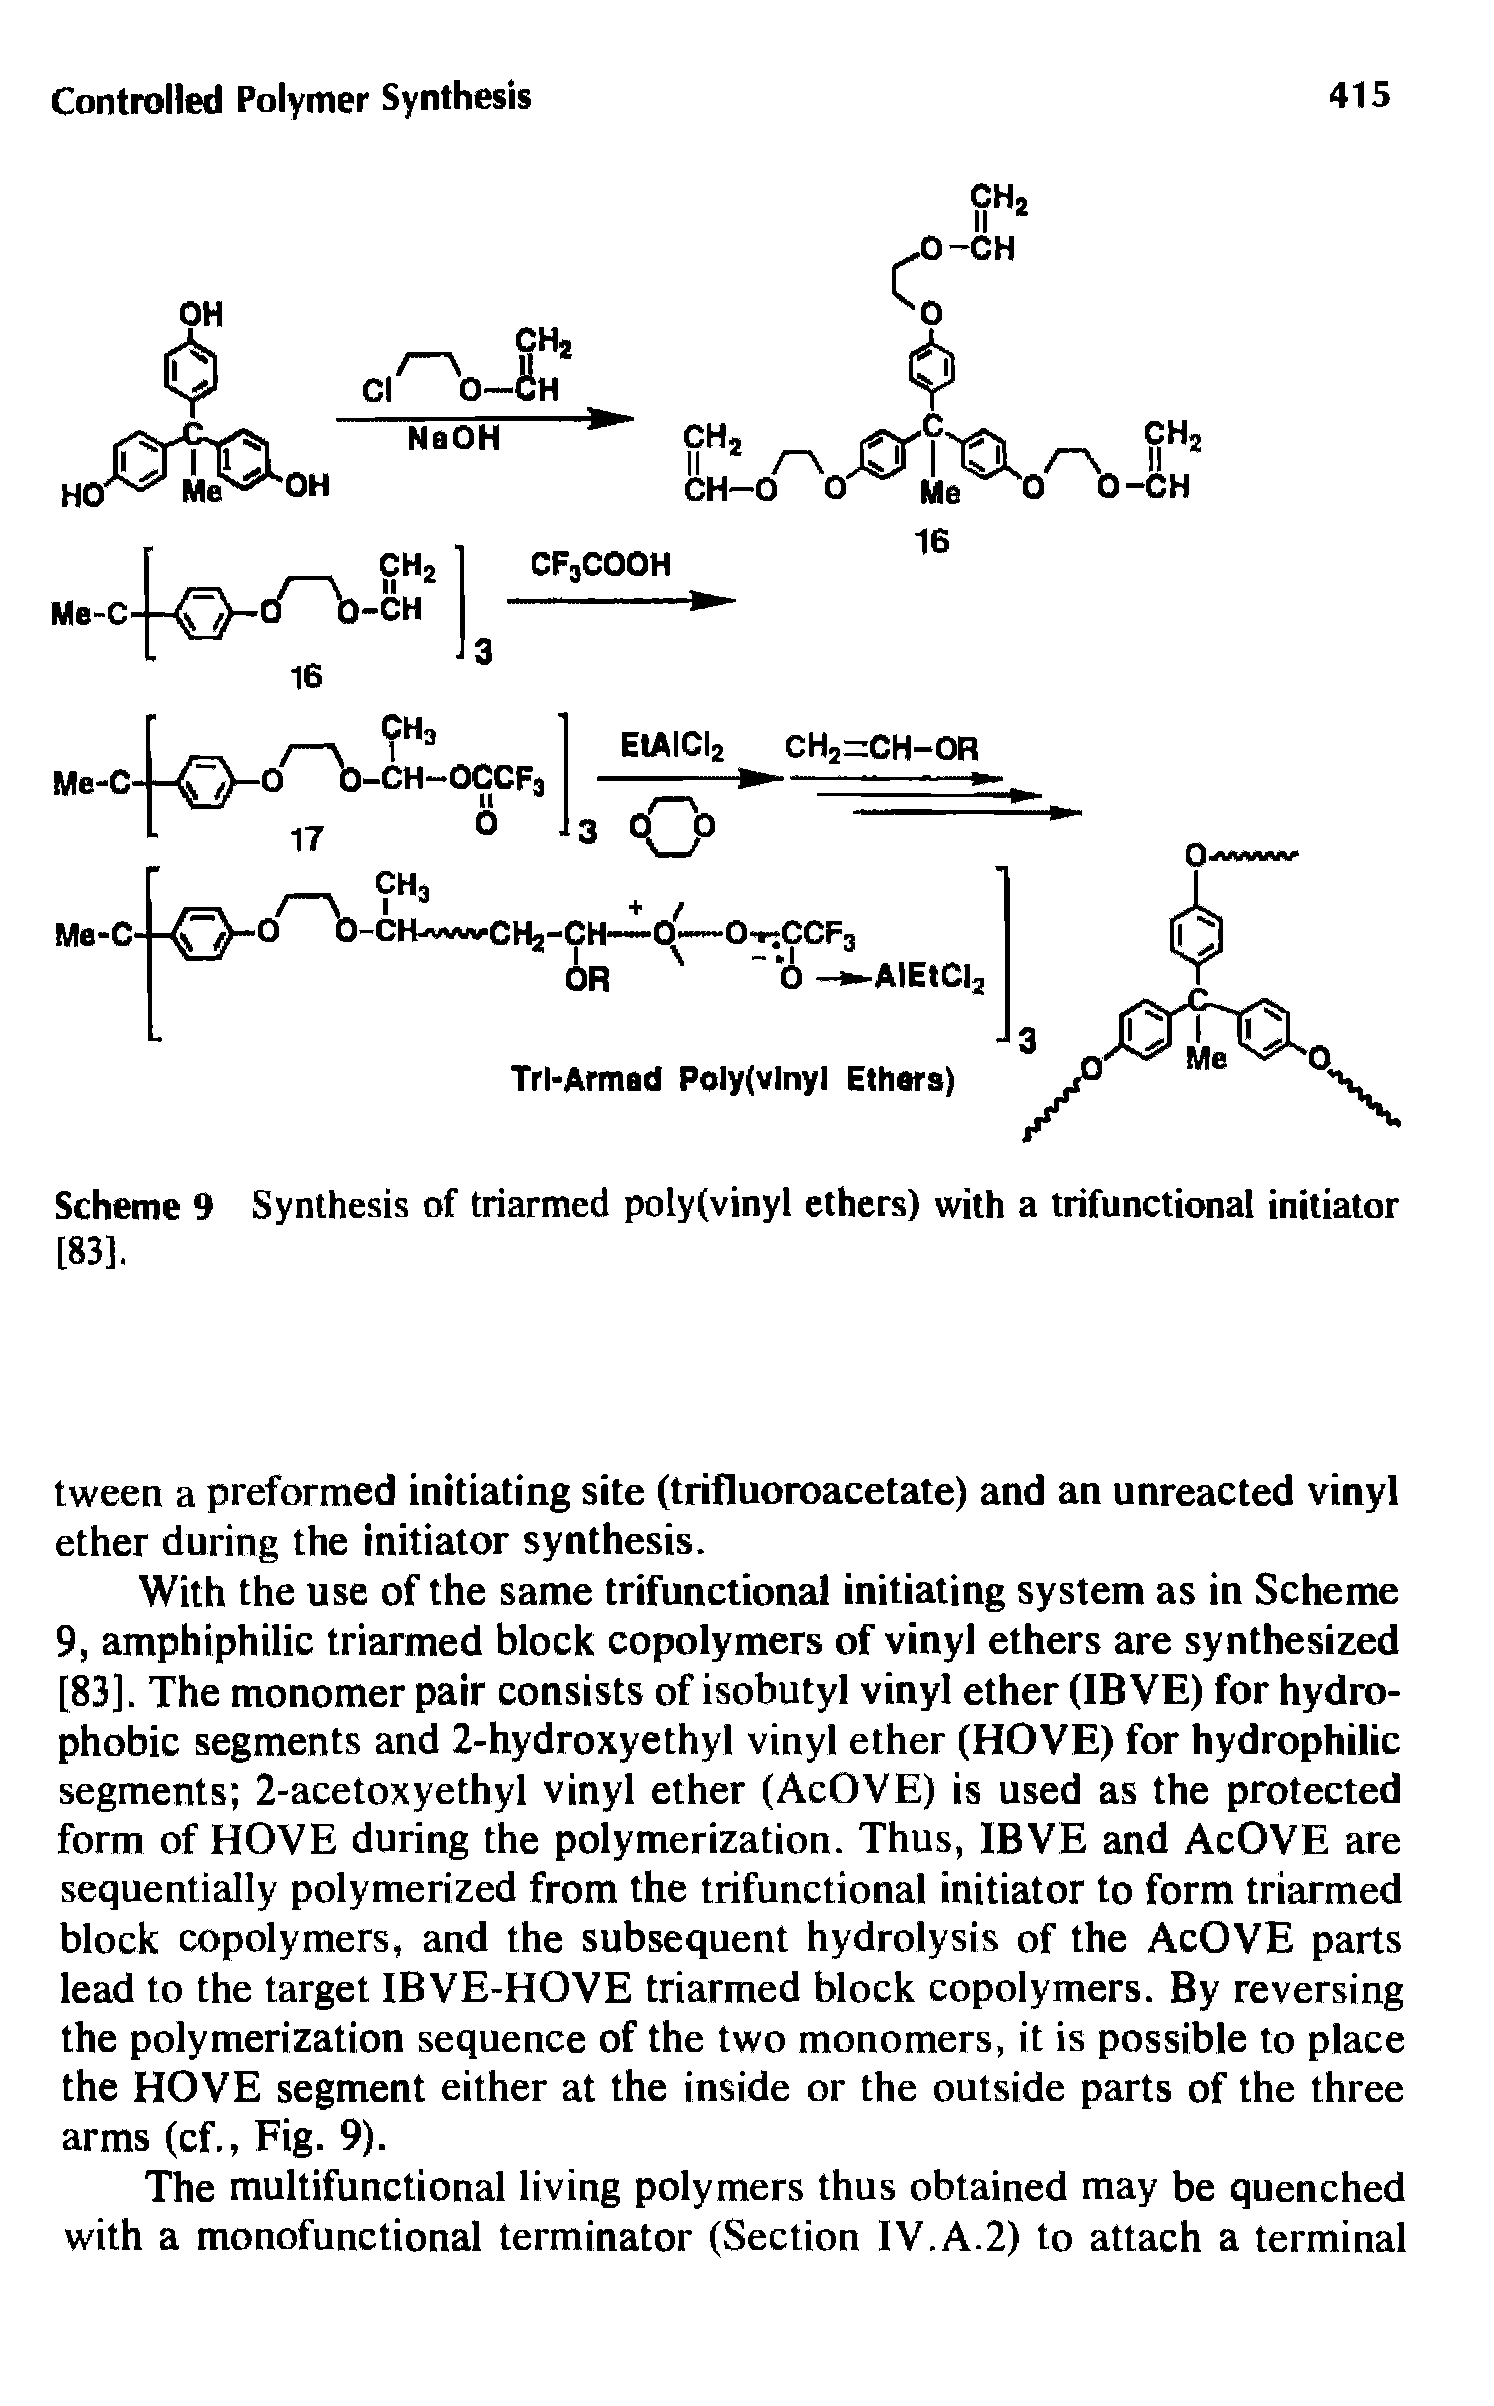 Scheme 9 Synthesis of triarmed poly(vinyl ethers) with a trifunctional initiator...